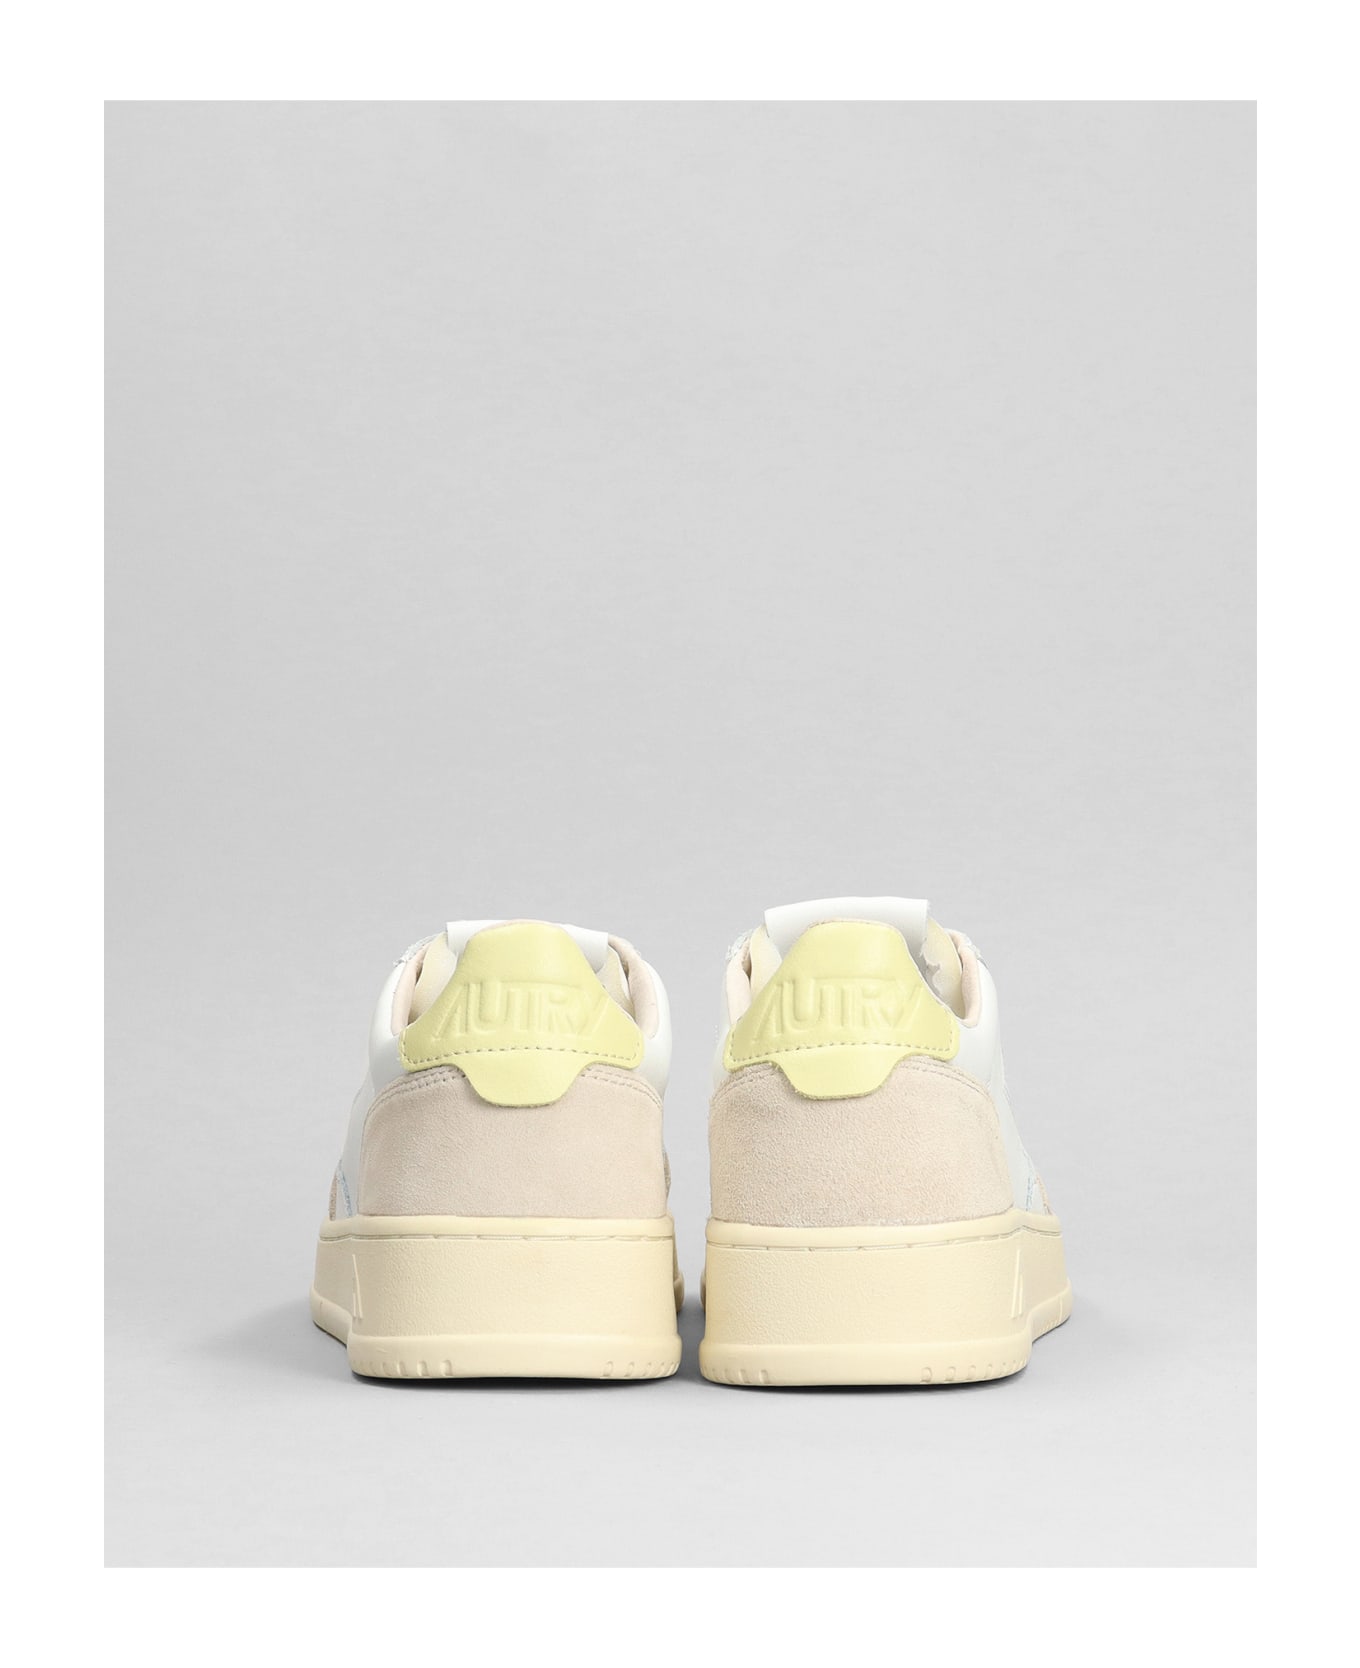 Autry Medalist Low Sneakers - WHITE/yellow